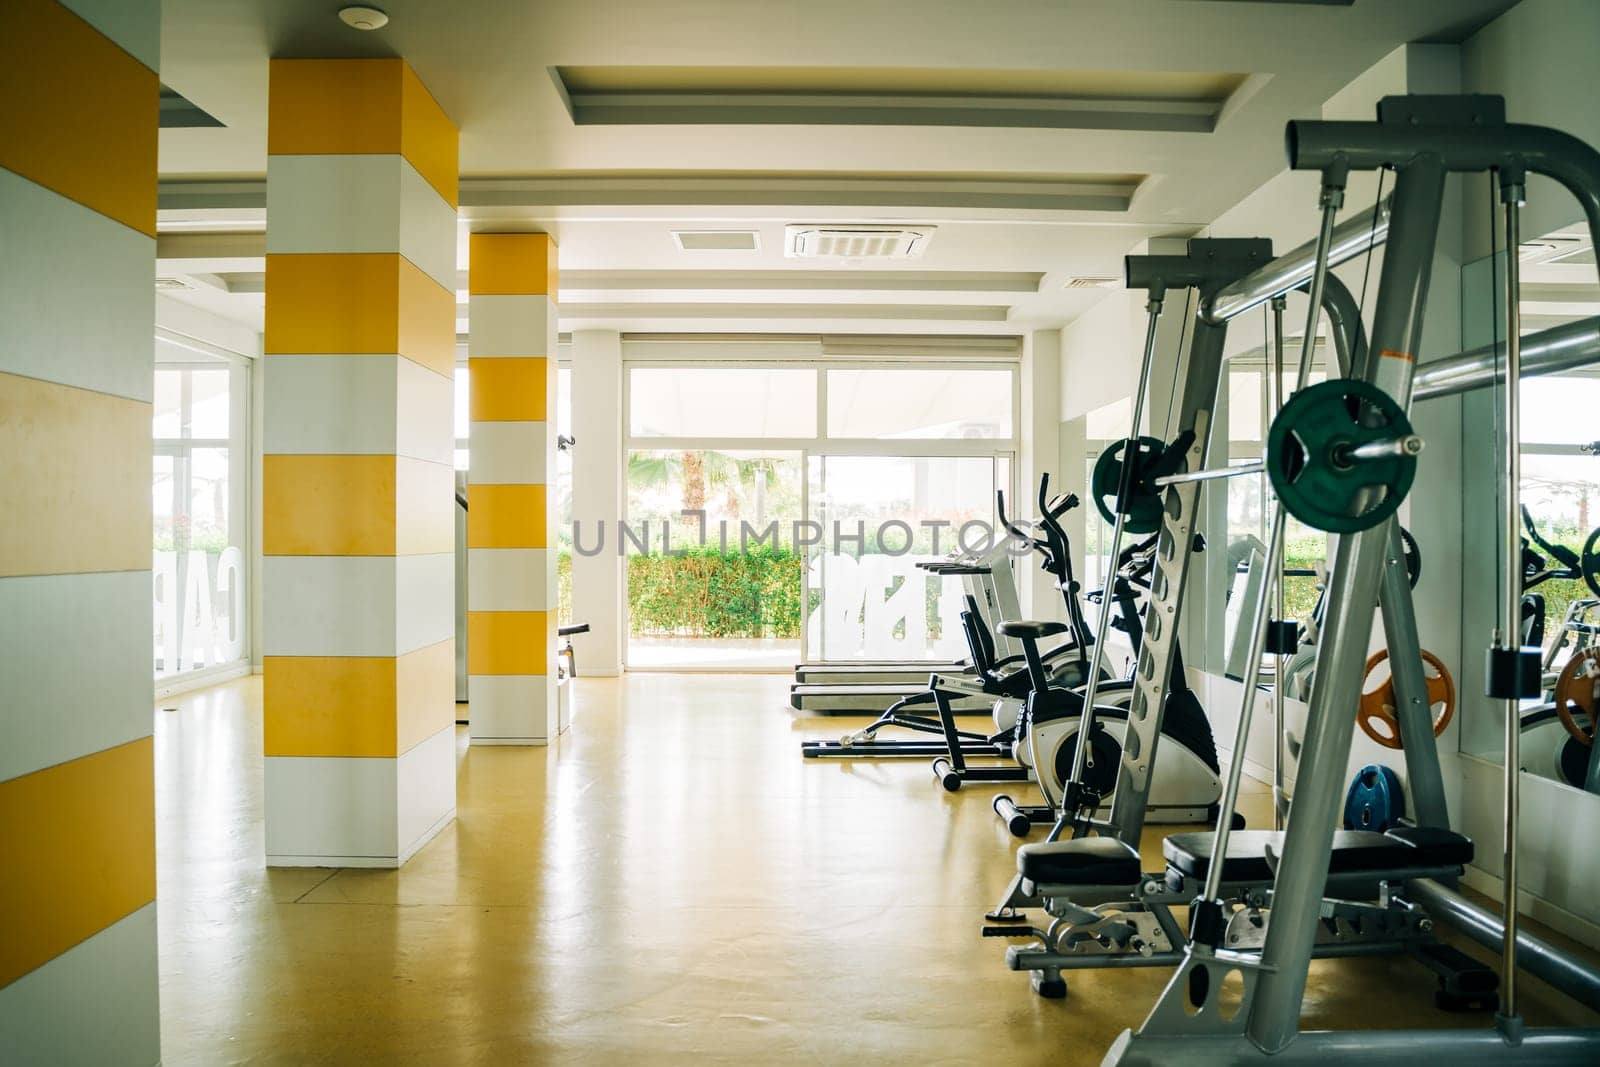 Gym Room Fitness Center With Various Equipment And Machines with views of palm and trees in Background of Large Glass Windows.